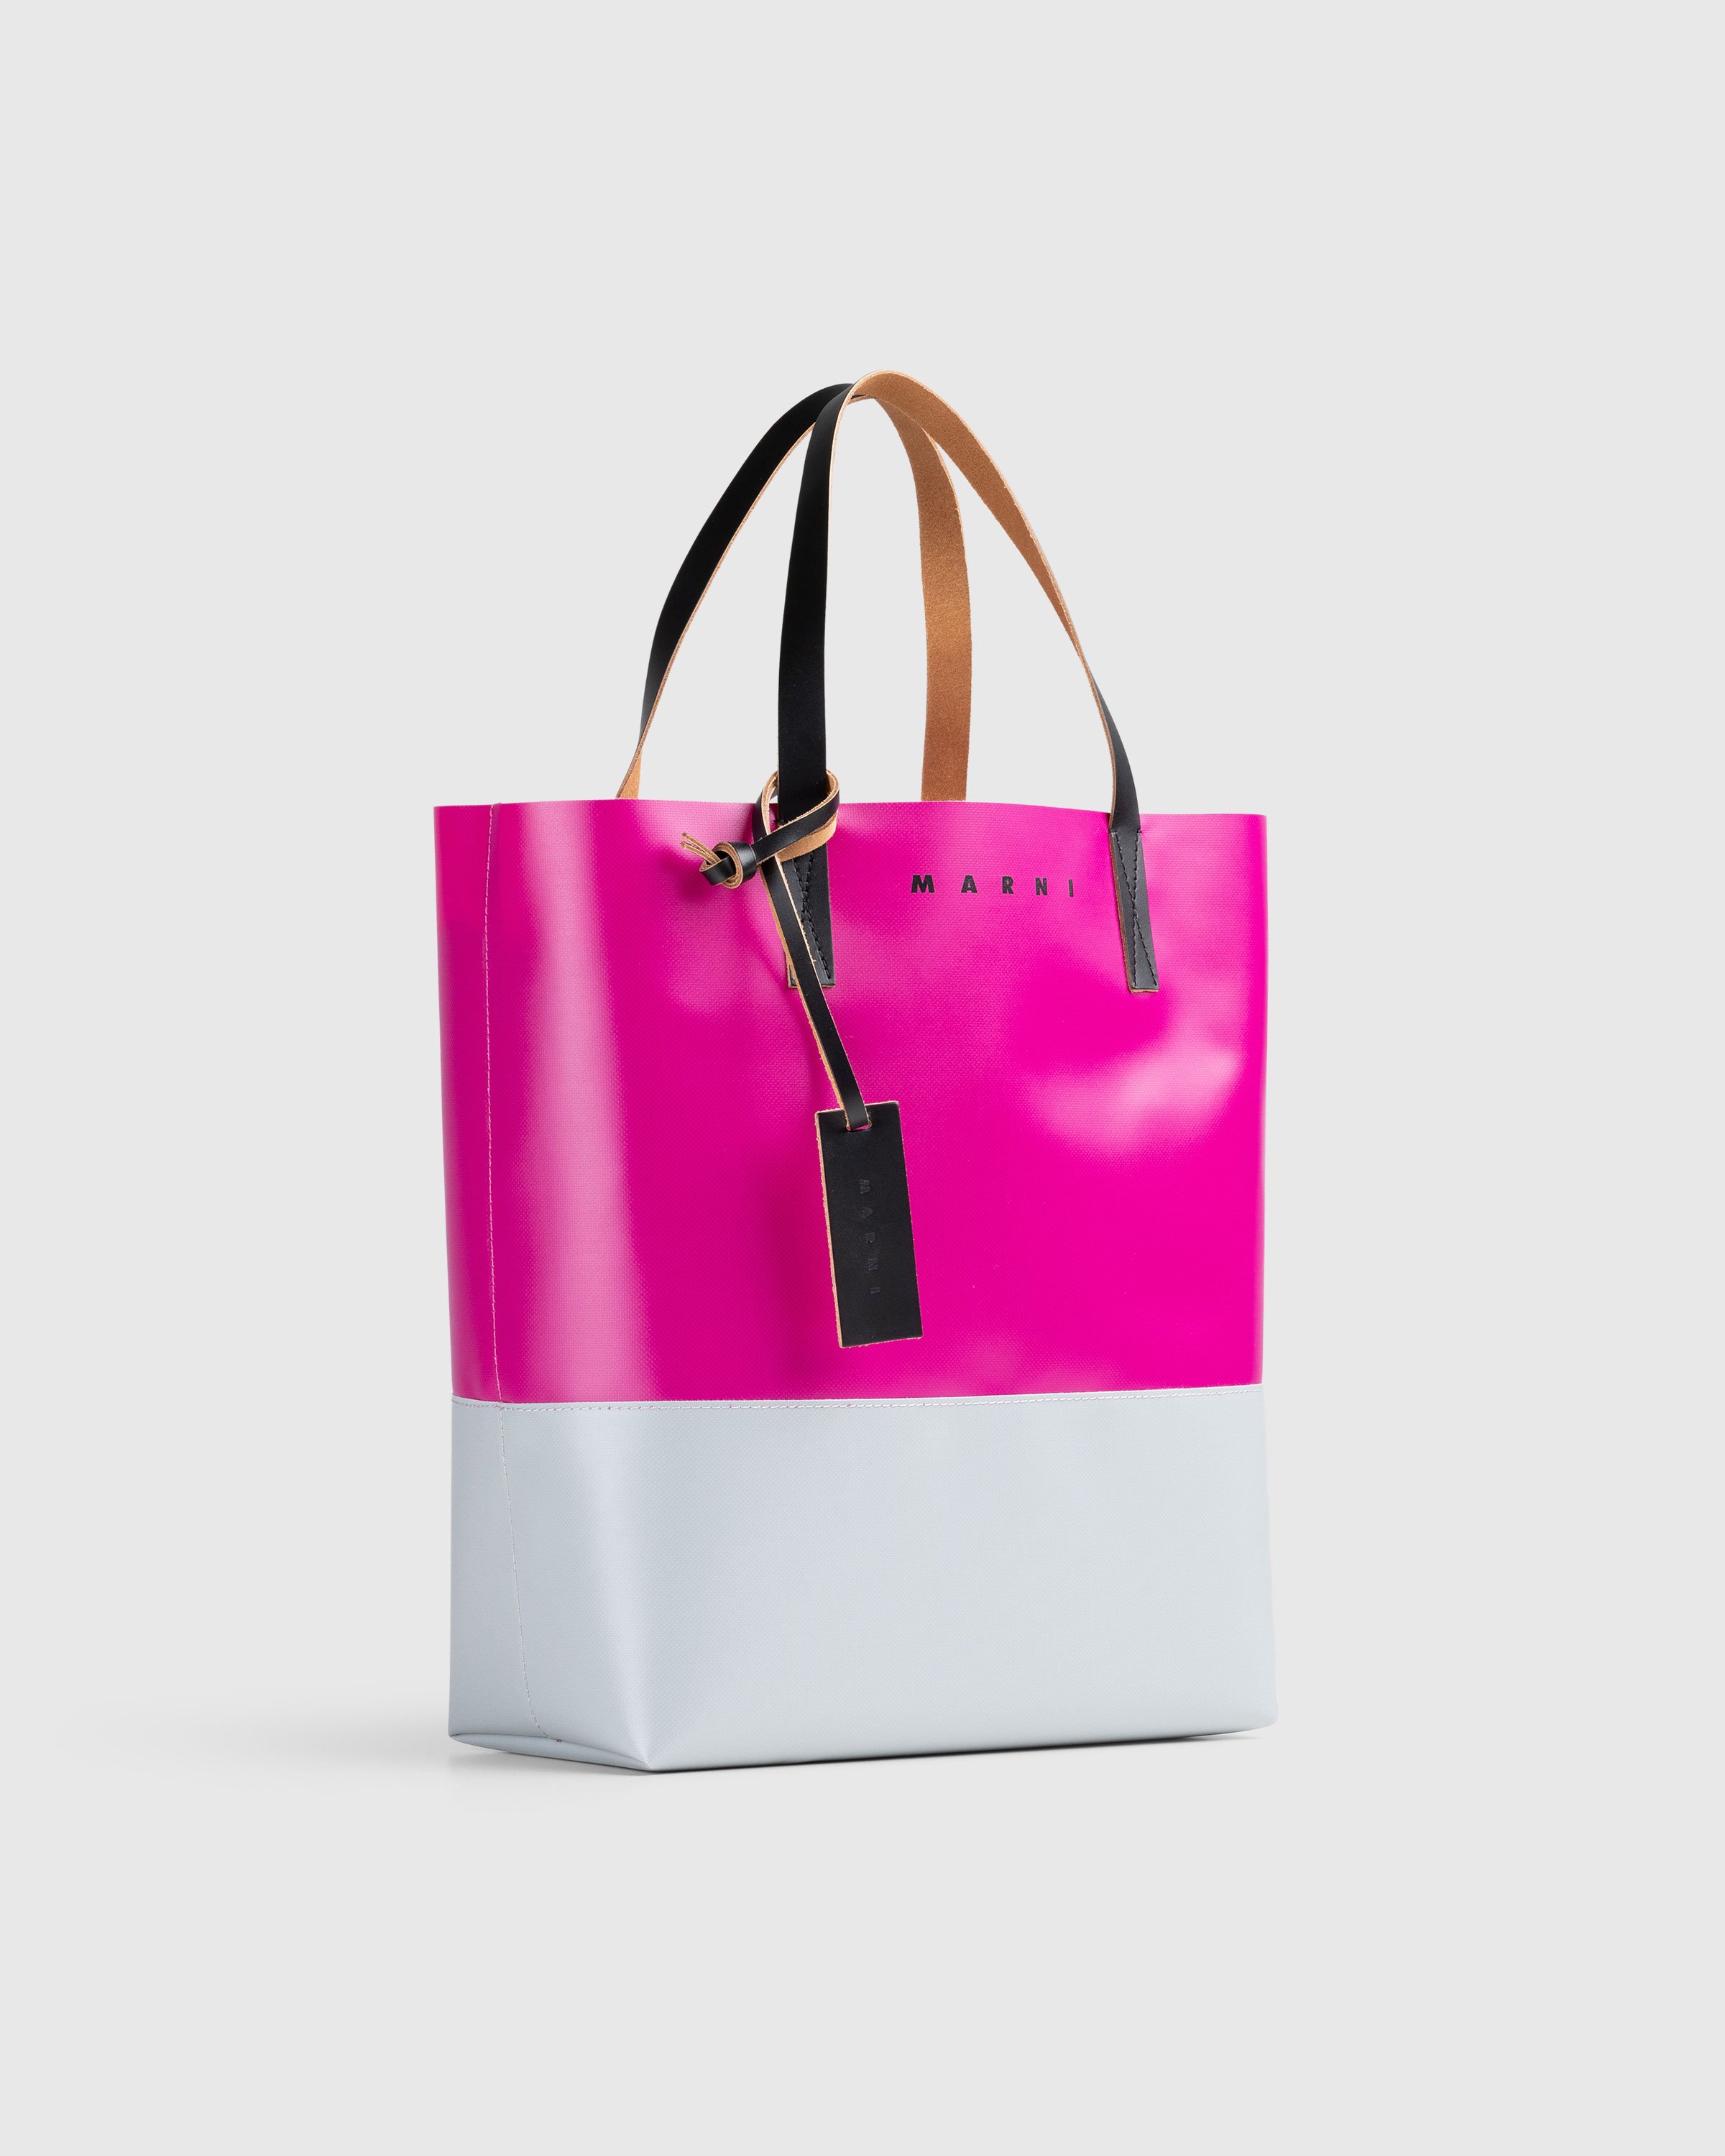 Marni - Tribeca Two-Tone Shopping Bag Pink/Grey - Accessories - Pink - Image 2